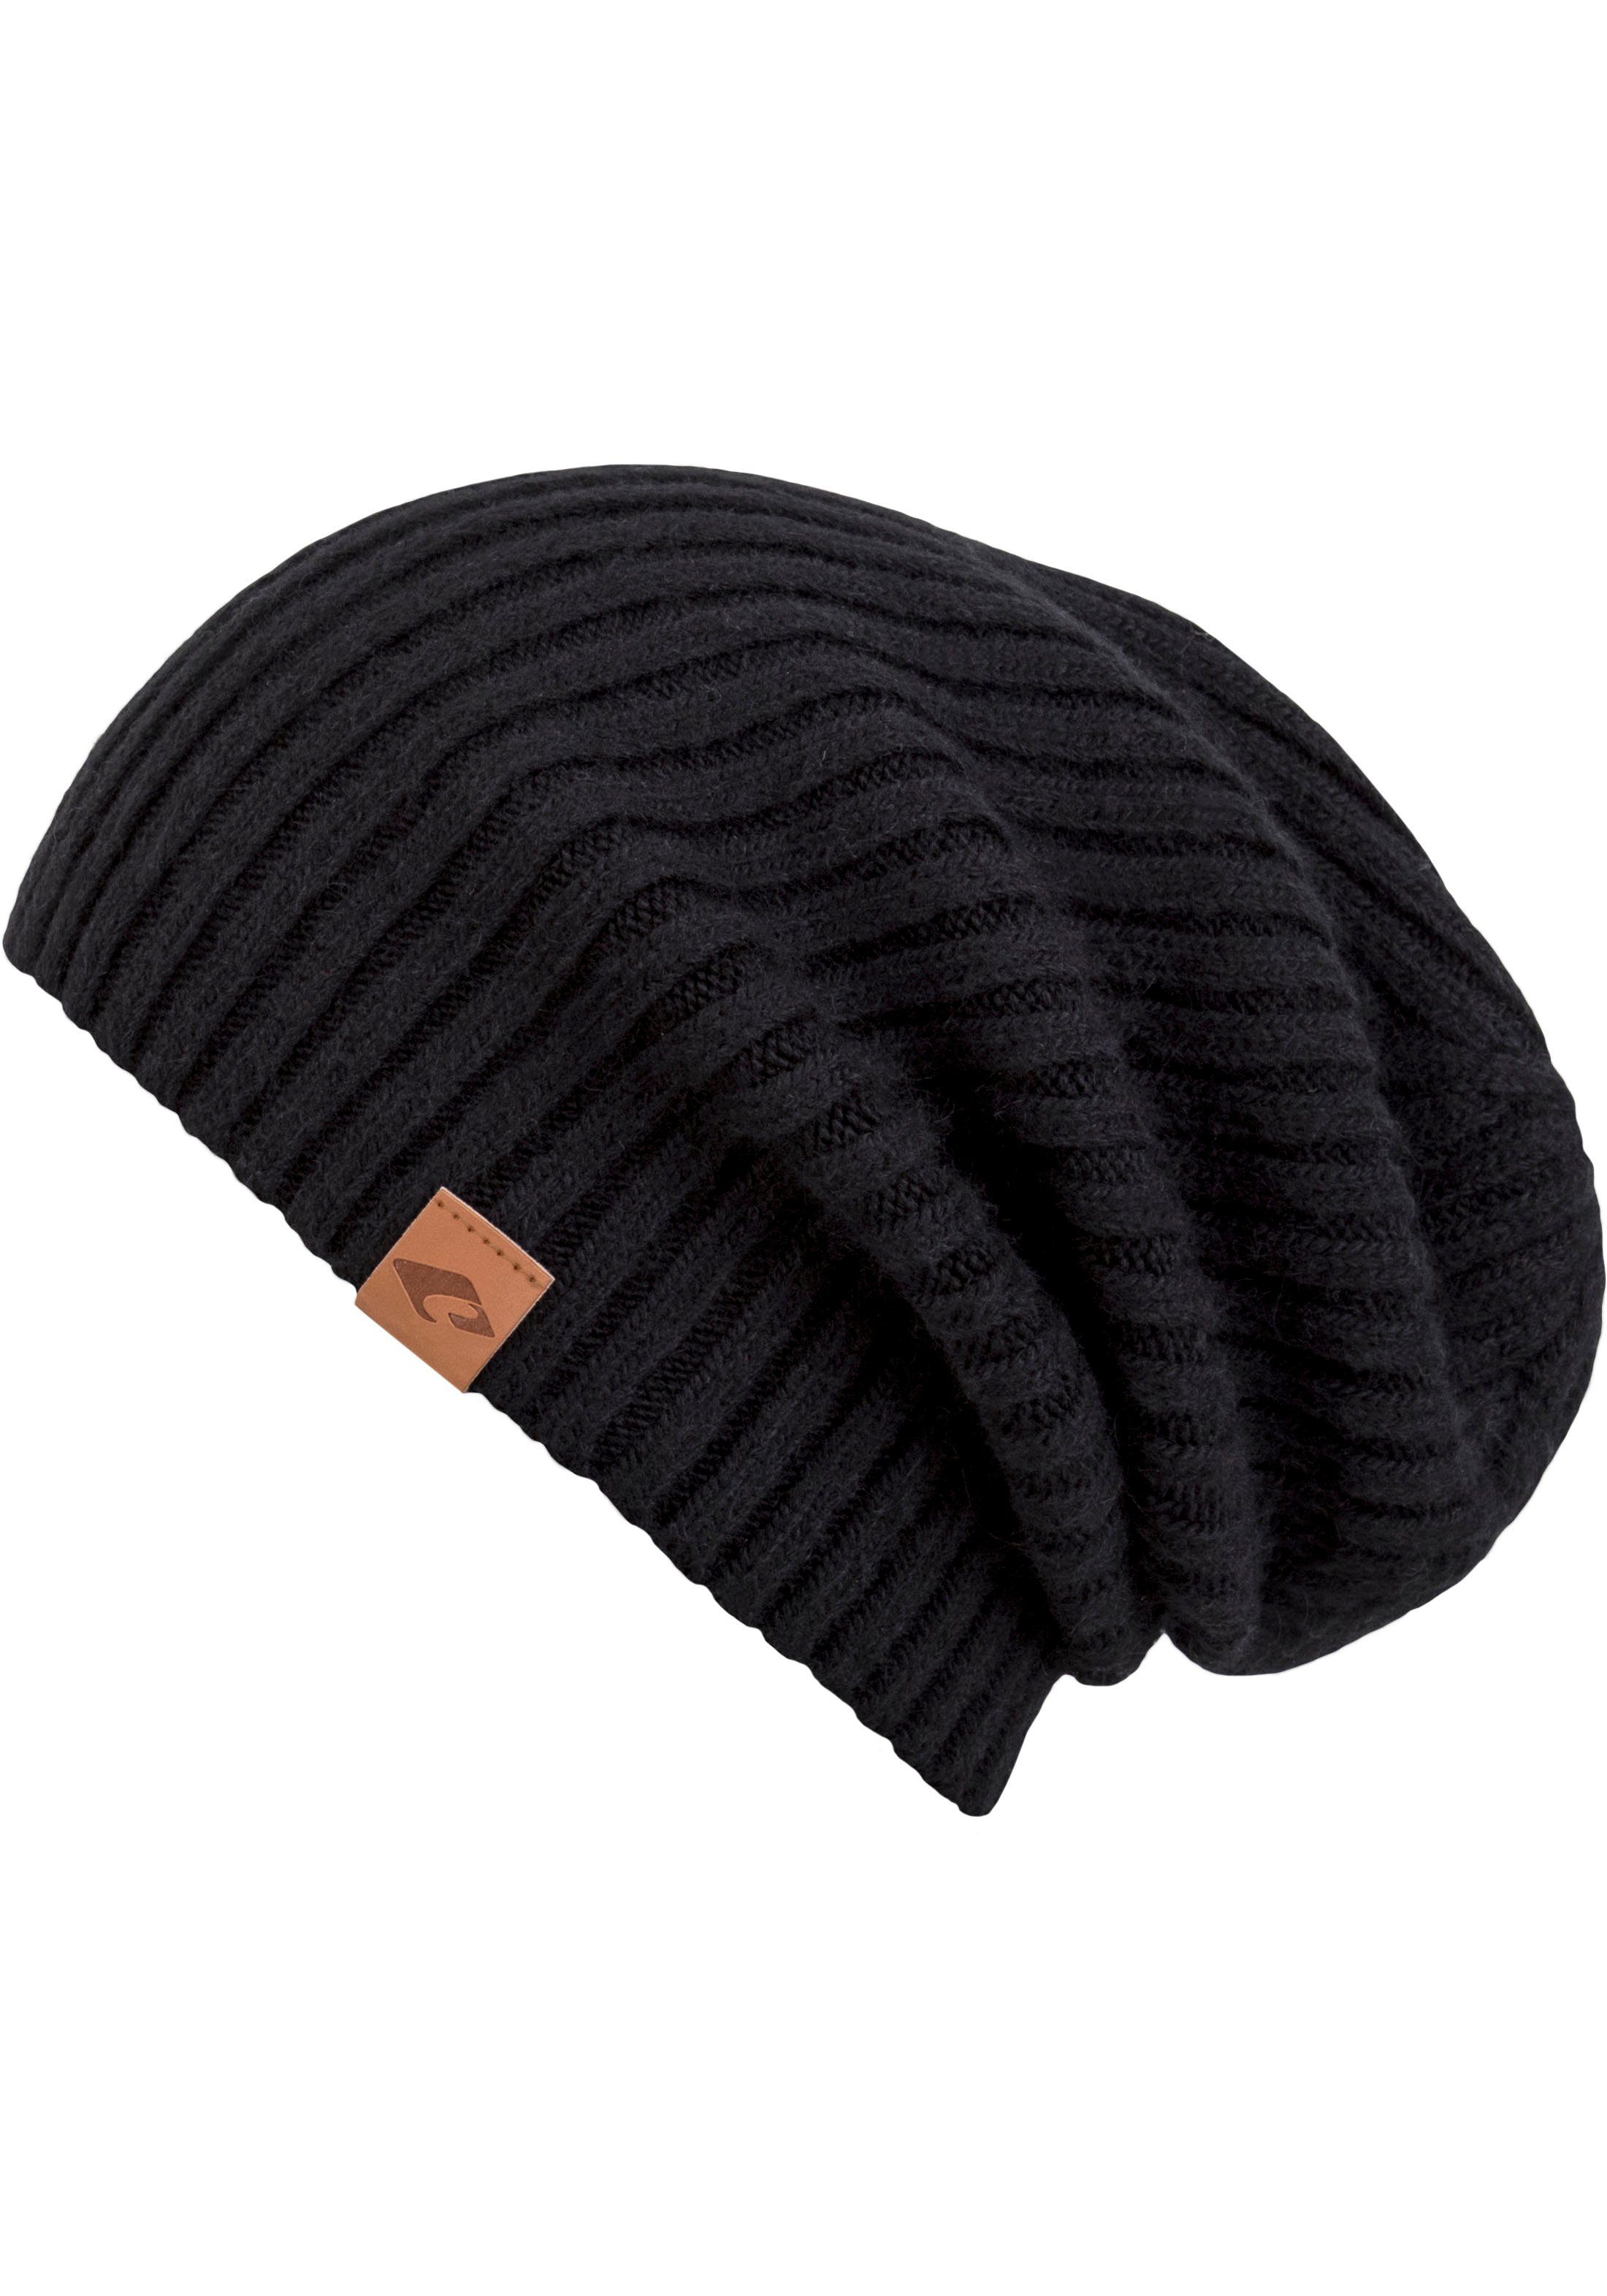 chillouts Hat Beanie Justin black